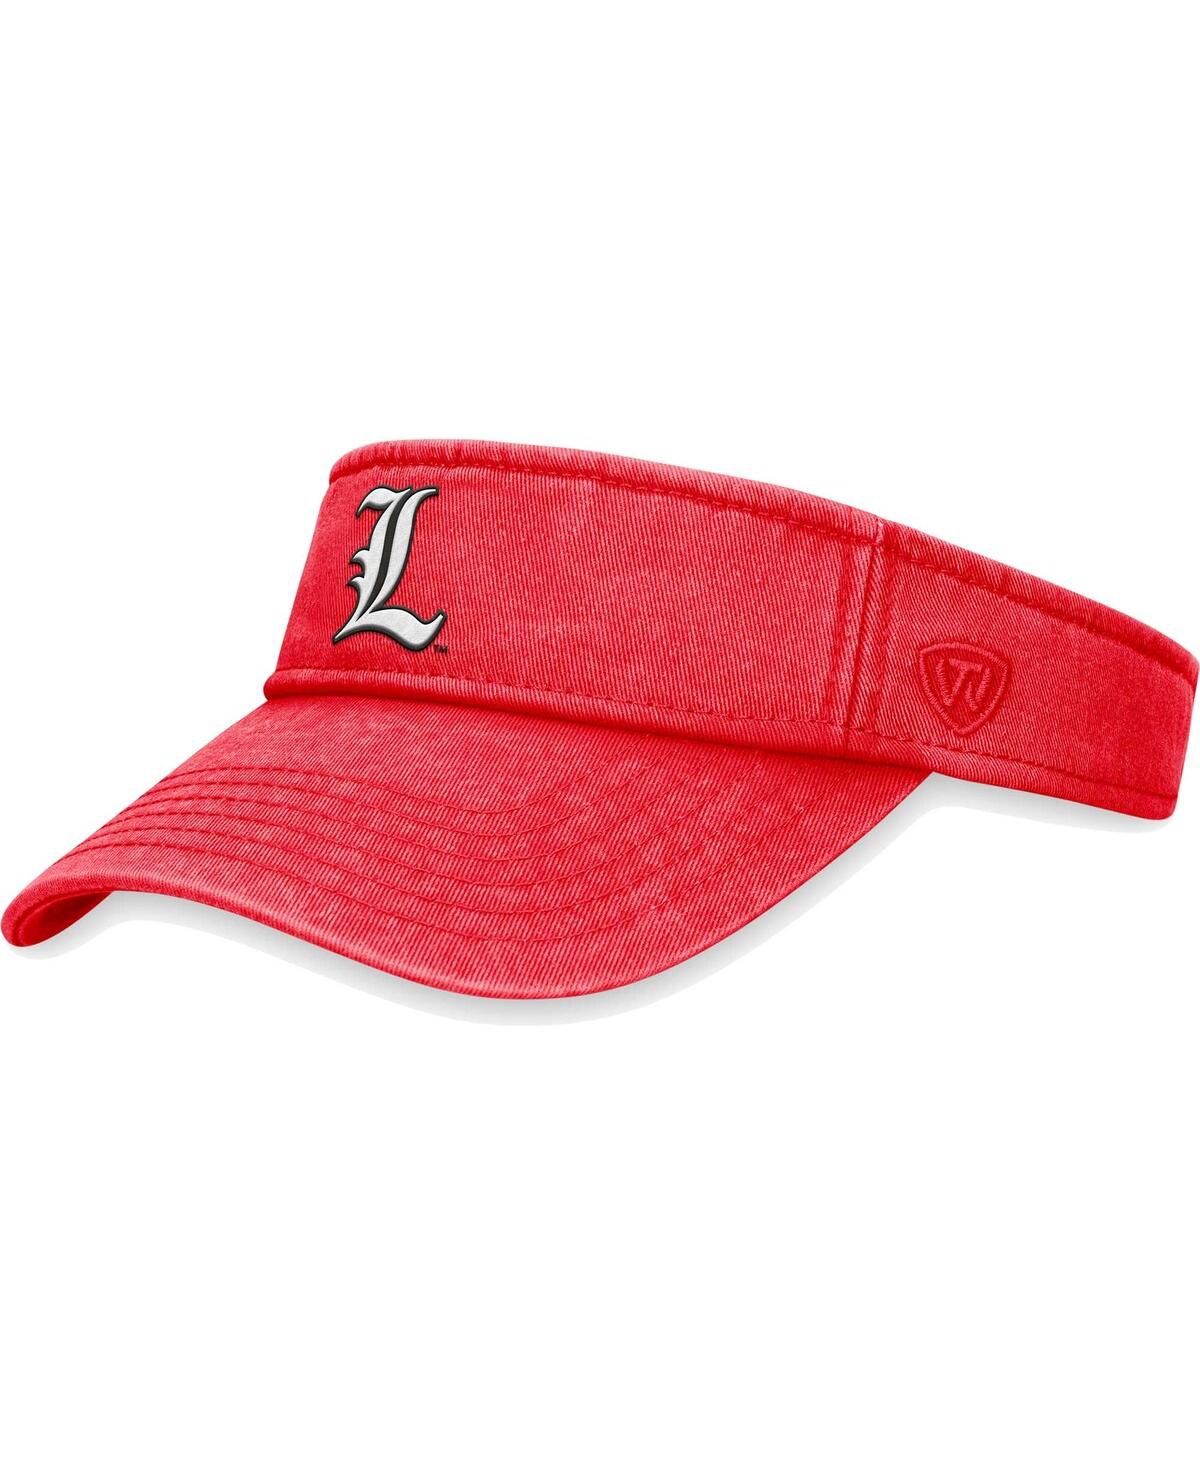 Men's Top of the World Red Louisville Cardinals Terry Adjustable Visor - Red